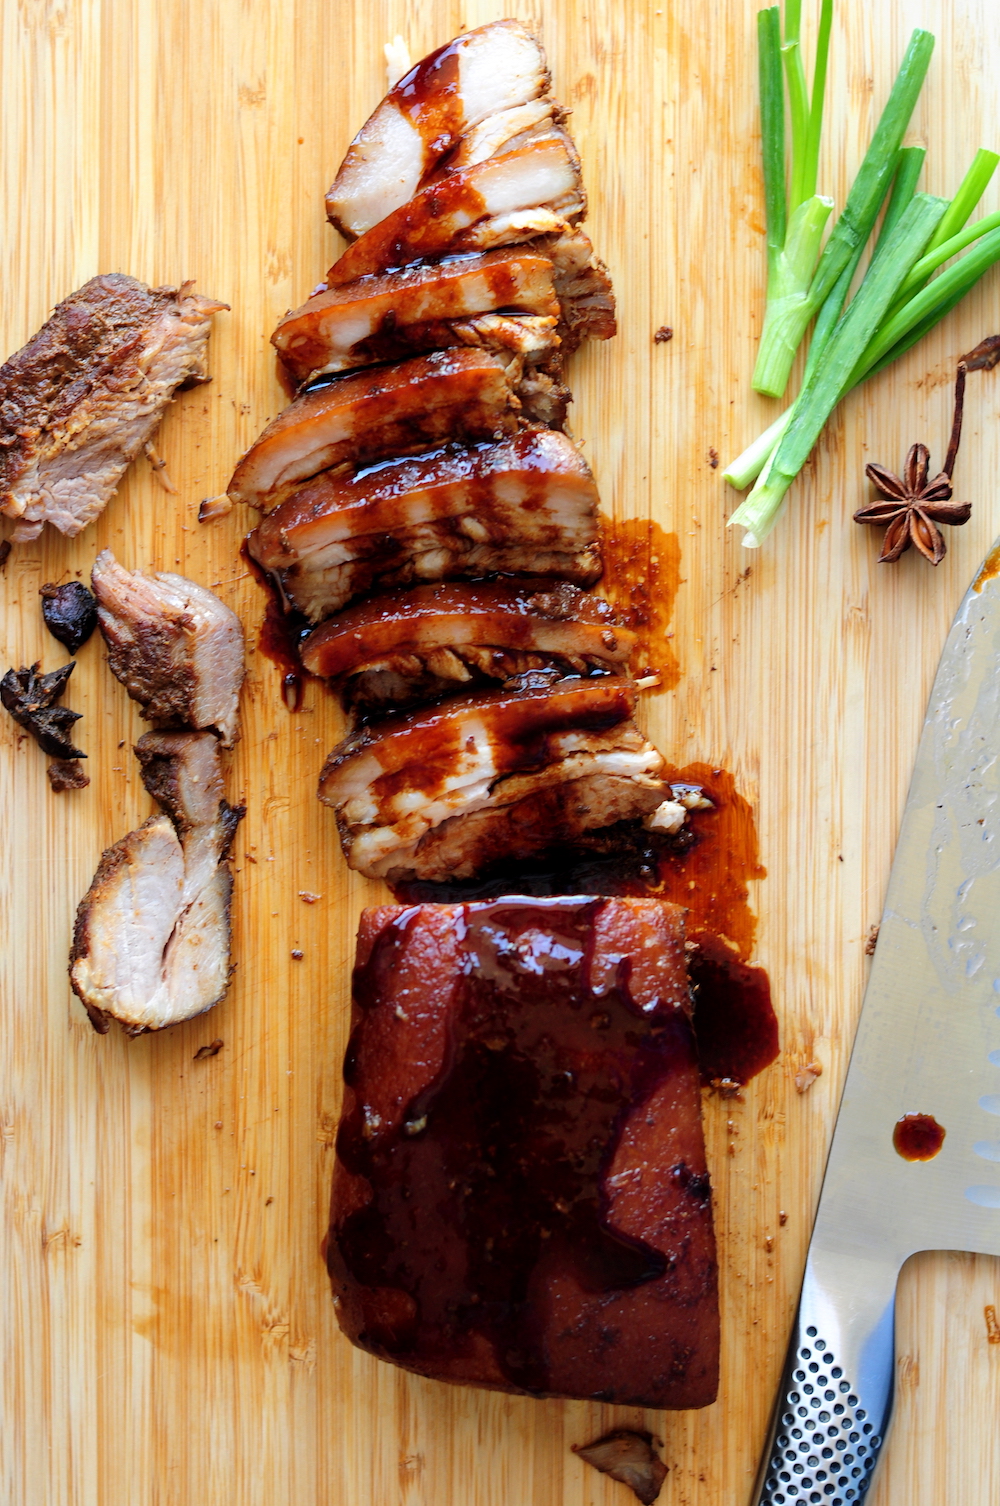 Red-Braised Sous Vide Pork Belly, a traditional classic Chinese recipe turned revolutionarily simple with the original melt-in-your-mouth texture and the authentic flavors!